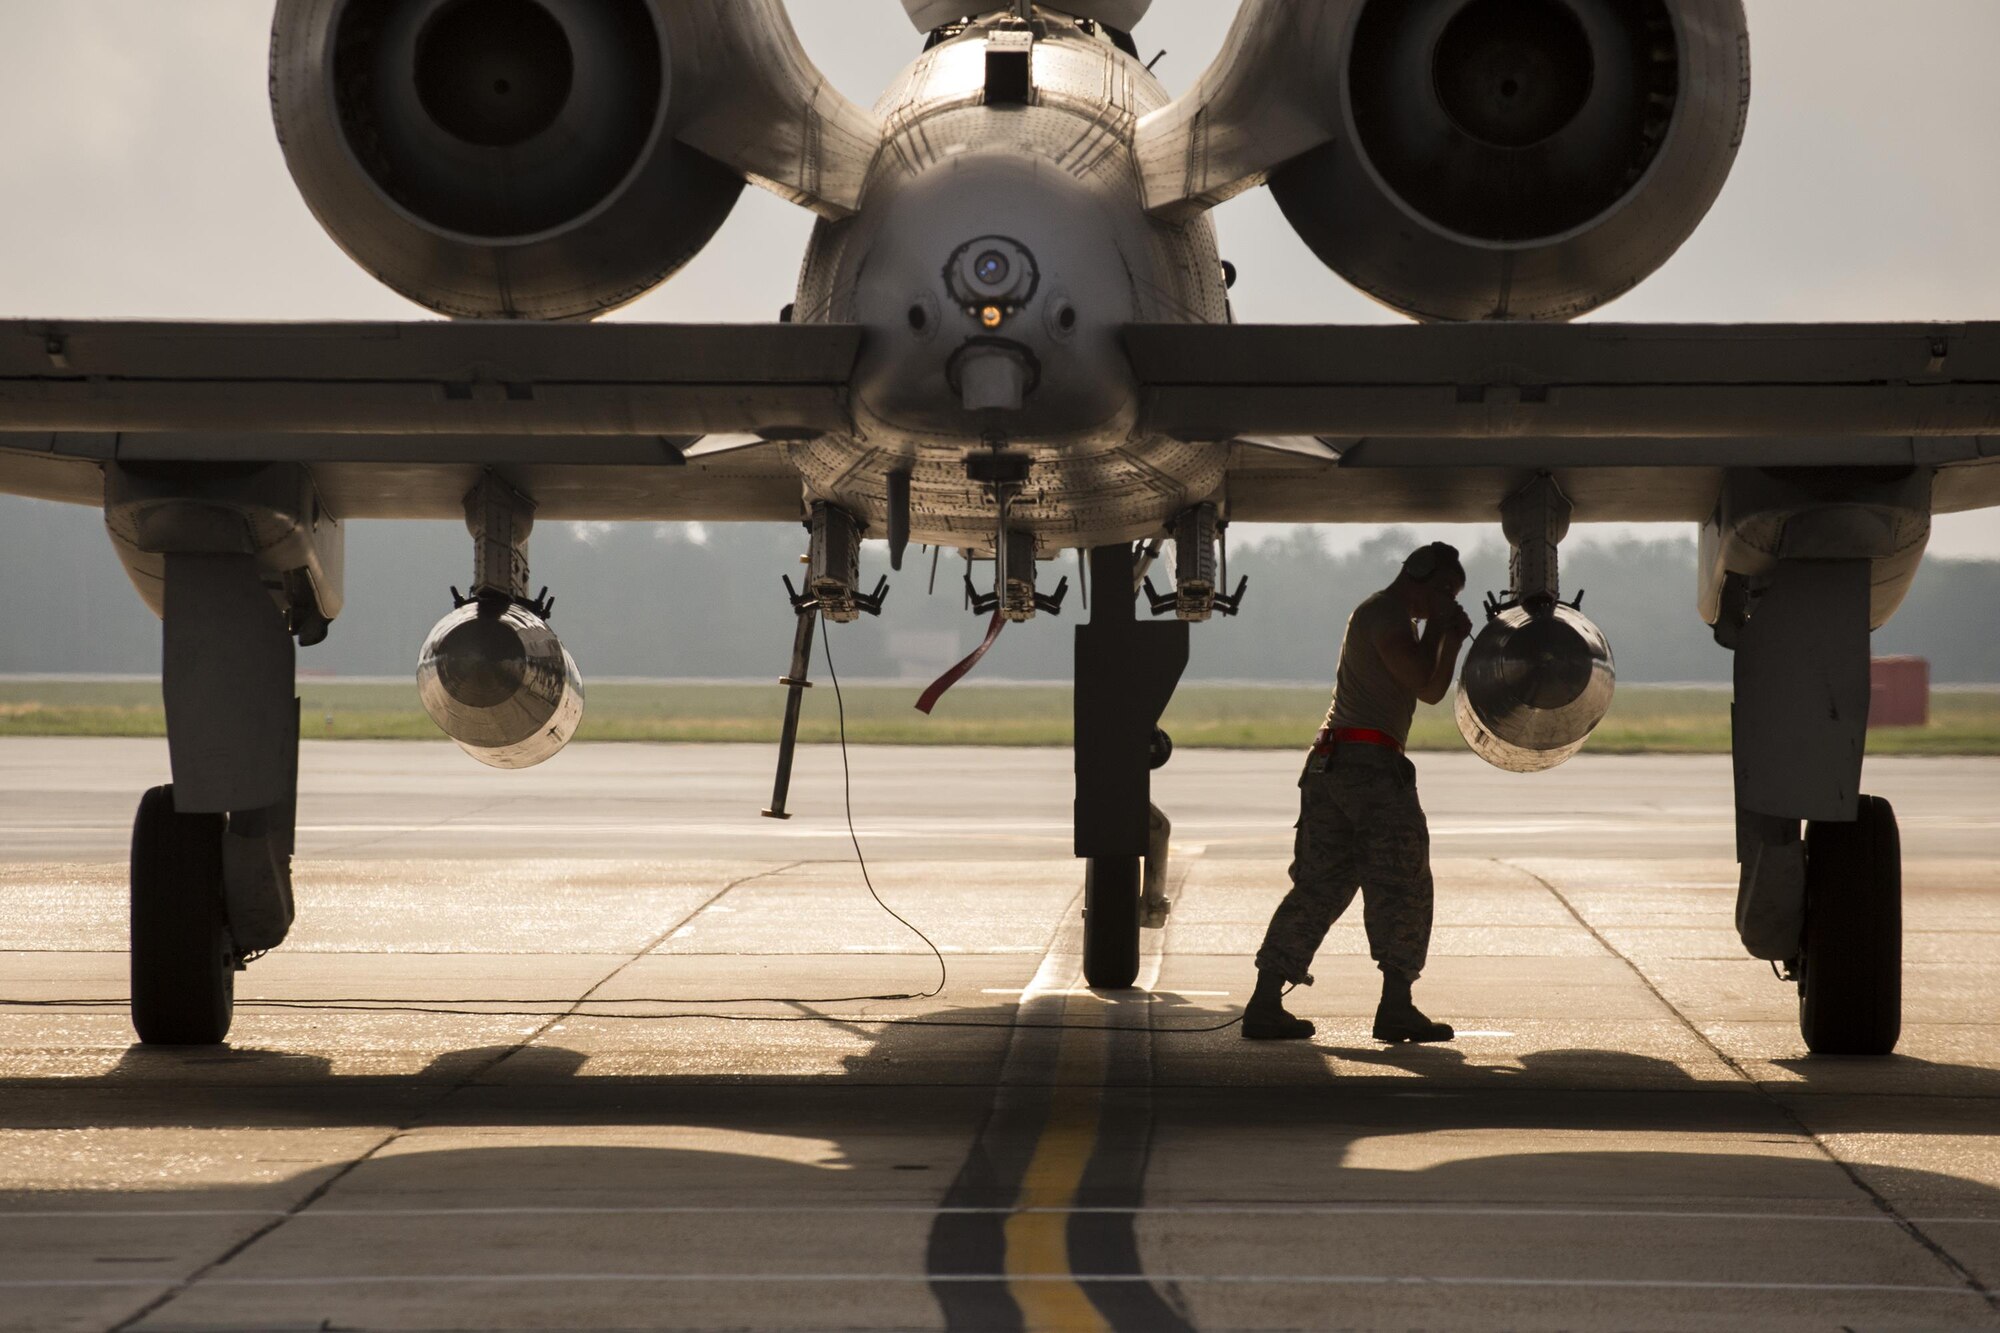 A crew chief from the 75th Aircraft Maintence Unit secures a travel pod during a pre-flight inspection on an A-10C Thunderbolt II, April 28, 2017 at Moody Air Force Base. The 75th FS departed for Combat Hammer, an air-to-ground exercise hosted at Hill Air Force Base, Utah. The exercise is designed to collect and analyze data on the performance of precision weapons and measure their suitability for use in combat. (U.S. Air Force photo by Andrea Jenkins)